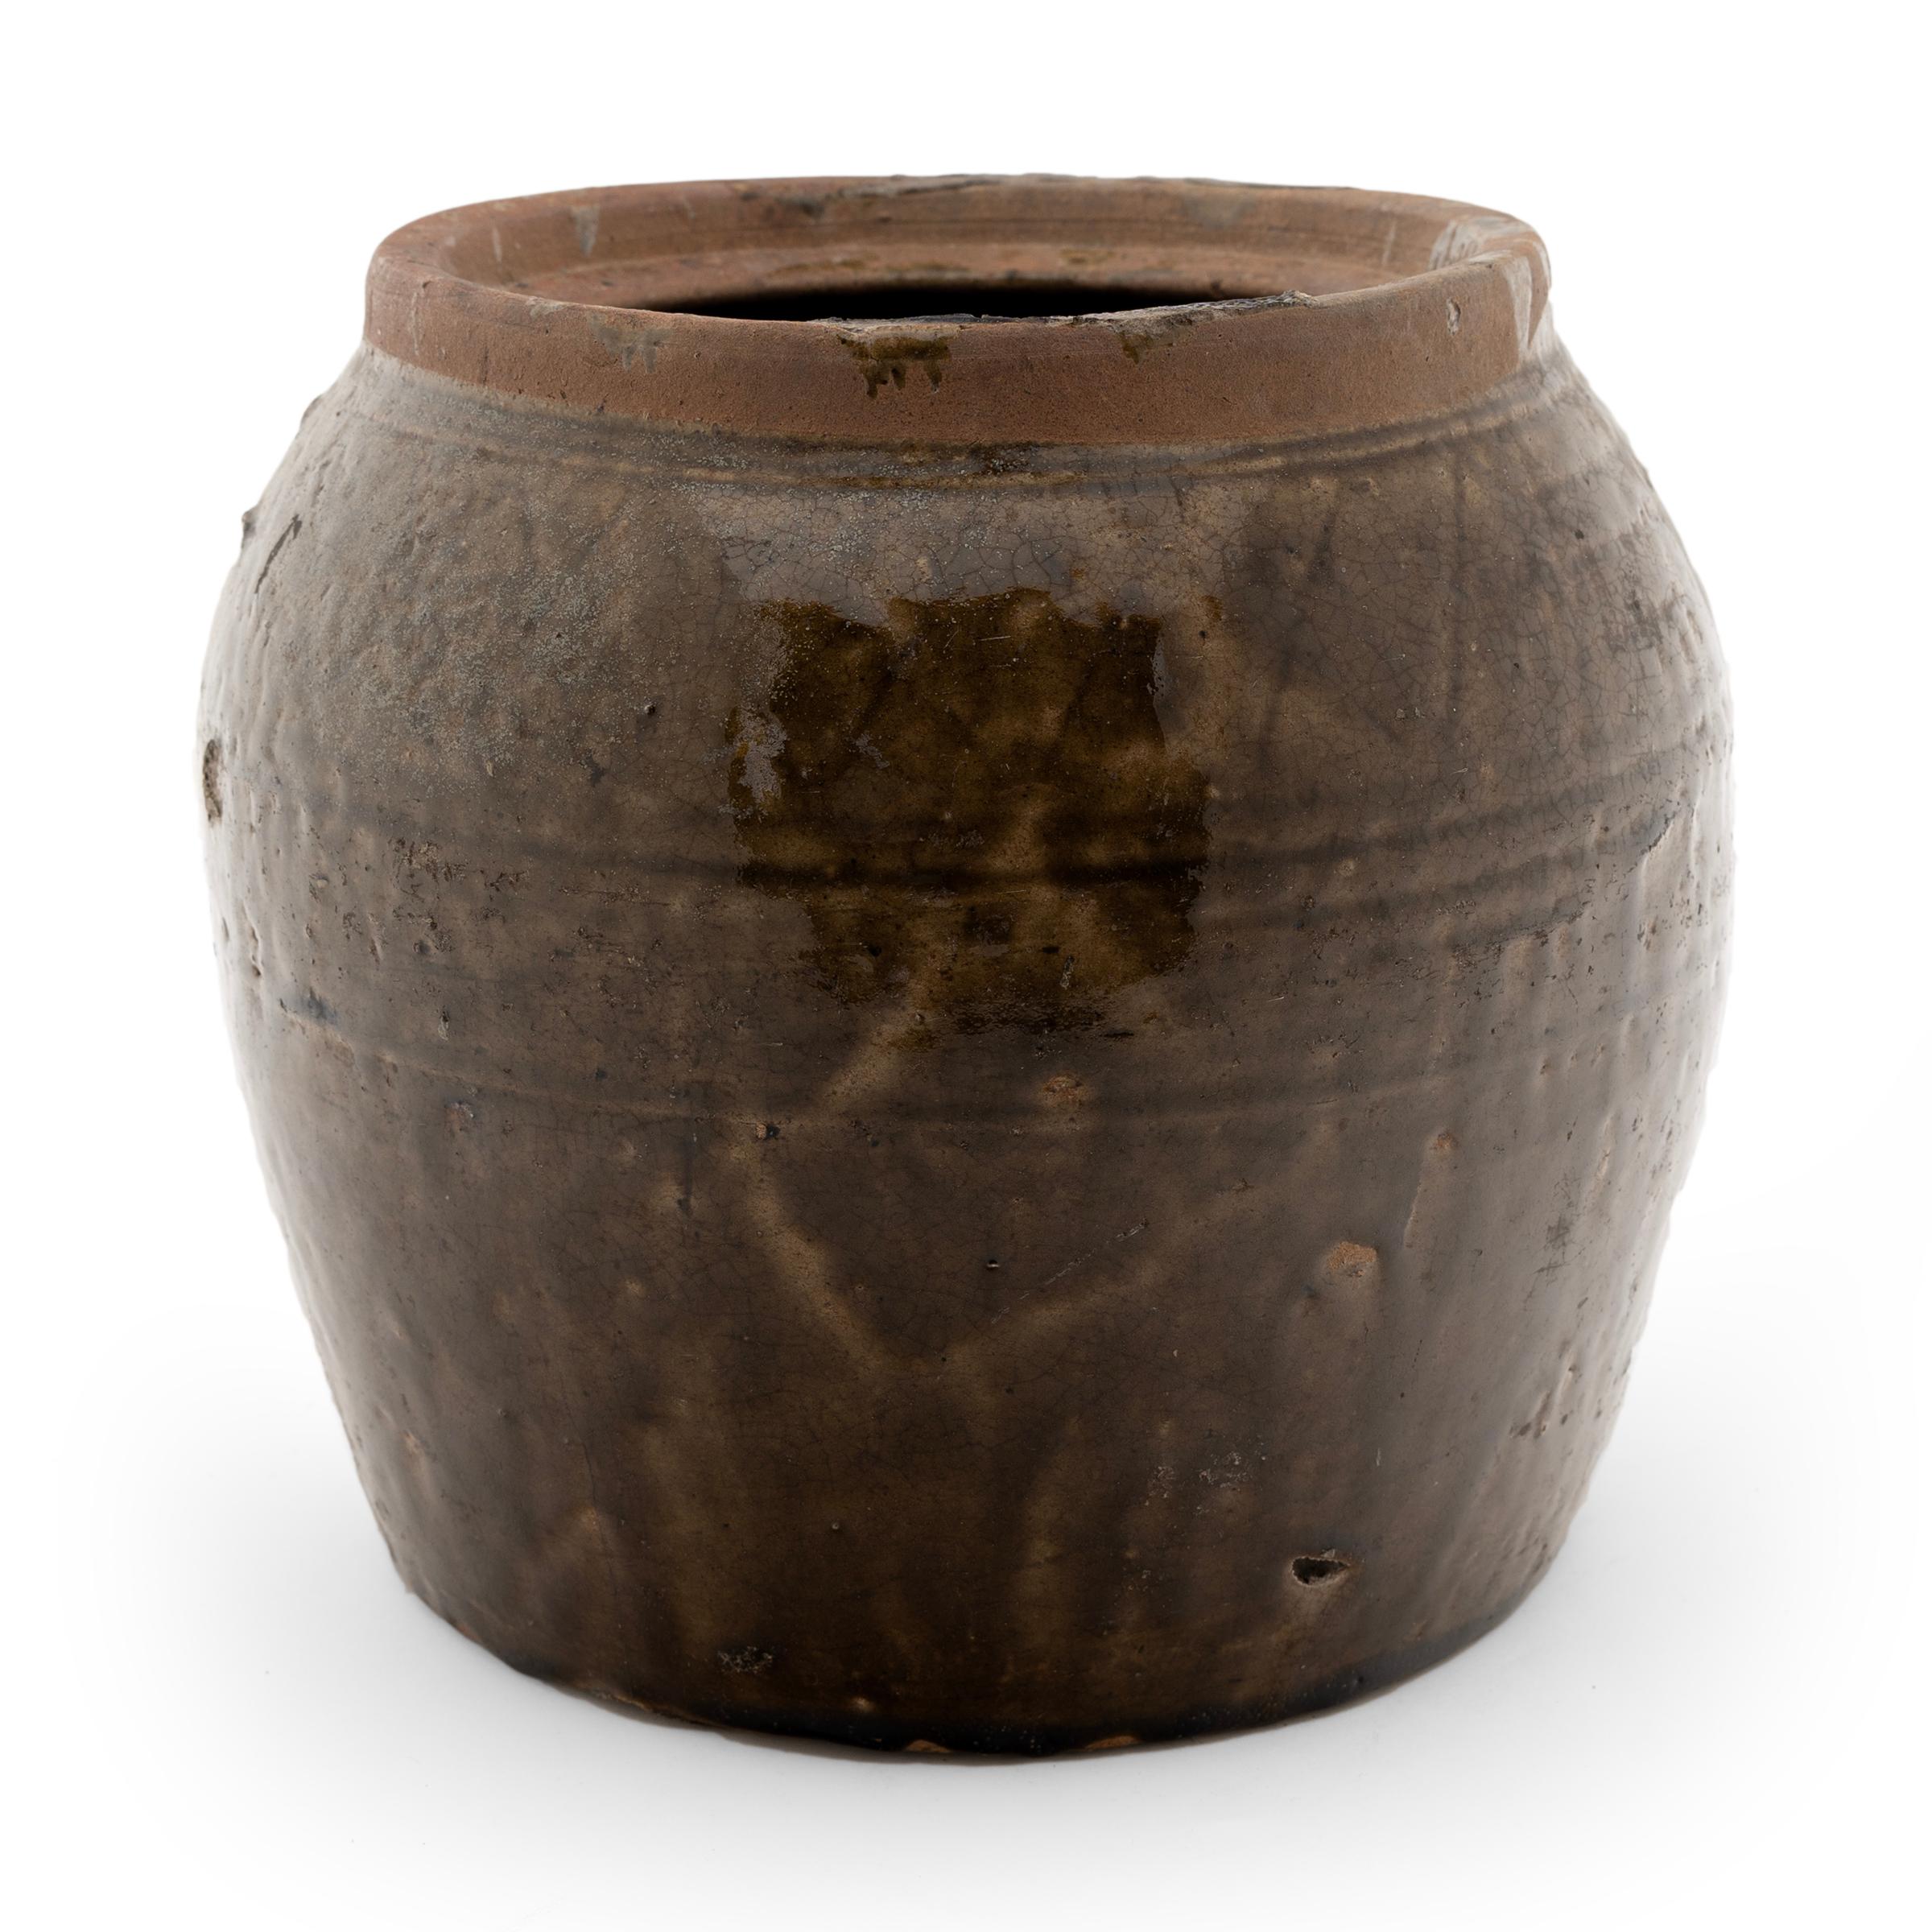 A captivating textured glaze coats the simple, slightly-tapered form of this Qing-dynasty kitchen jar. Drip patterns and firing imperfections give the jar fantastic character, casting shades of light and dark brown across the vessel. Crafted in the